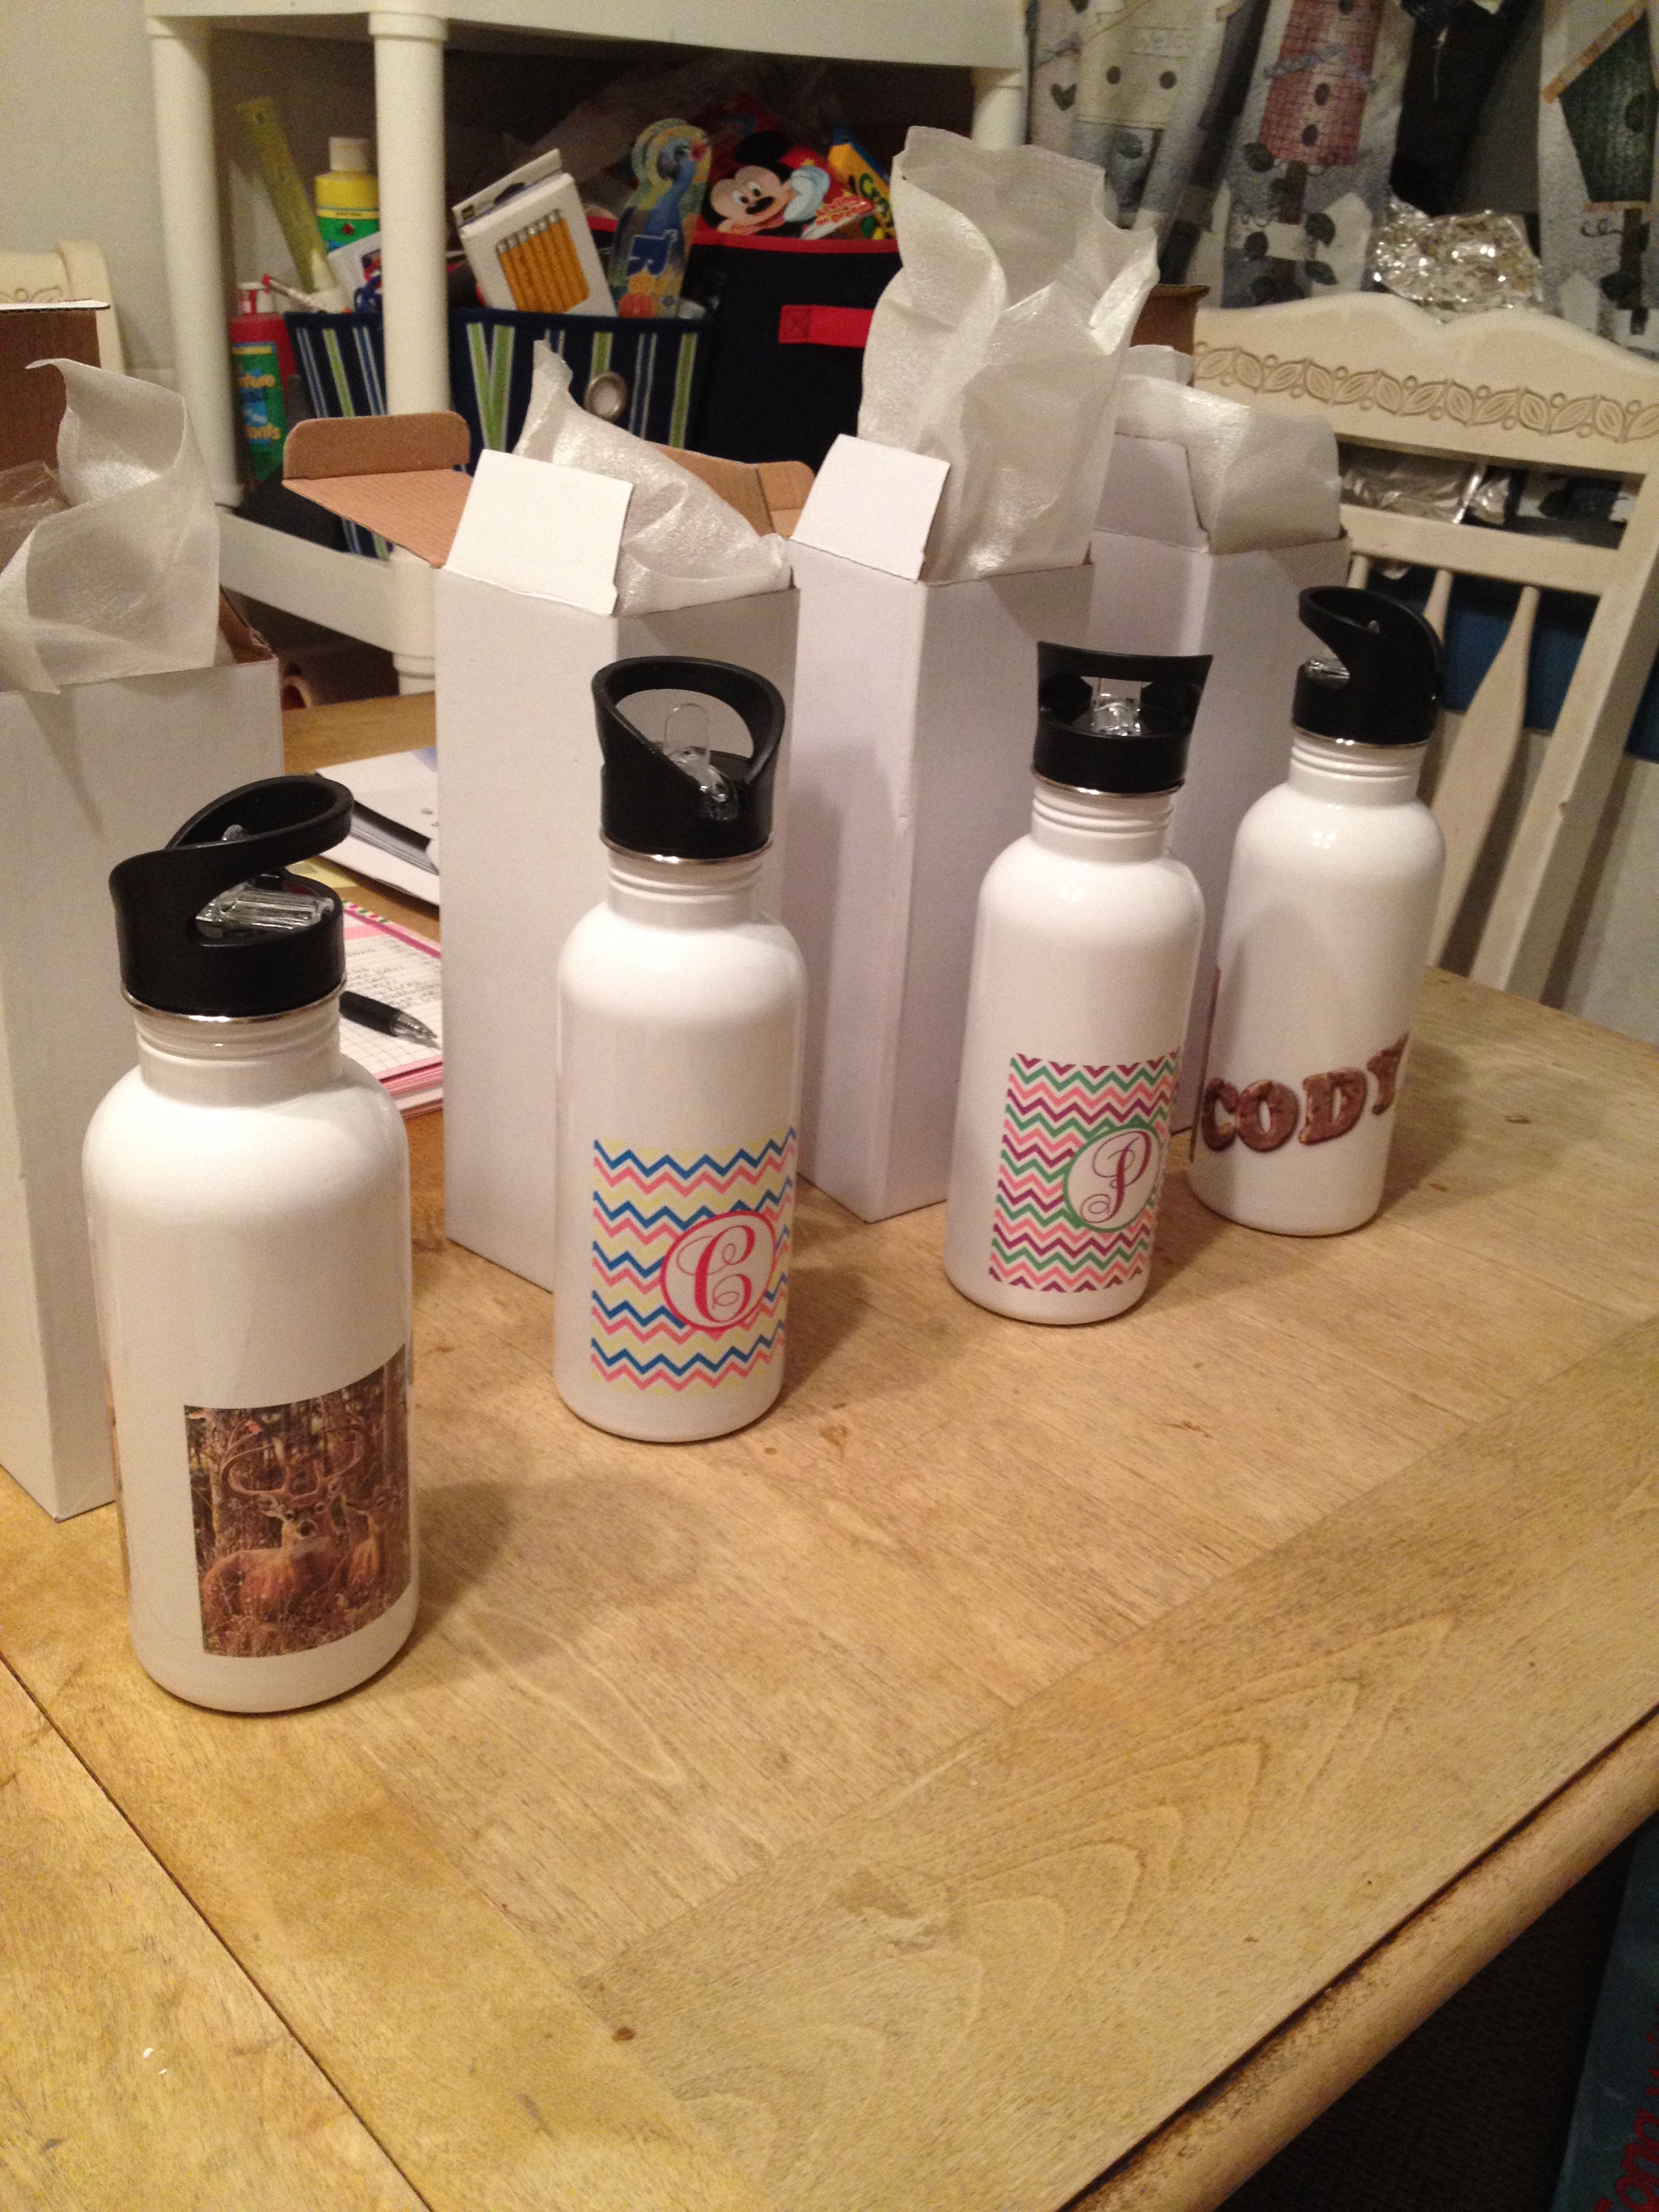 Water Bottles made with sublimation printing